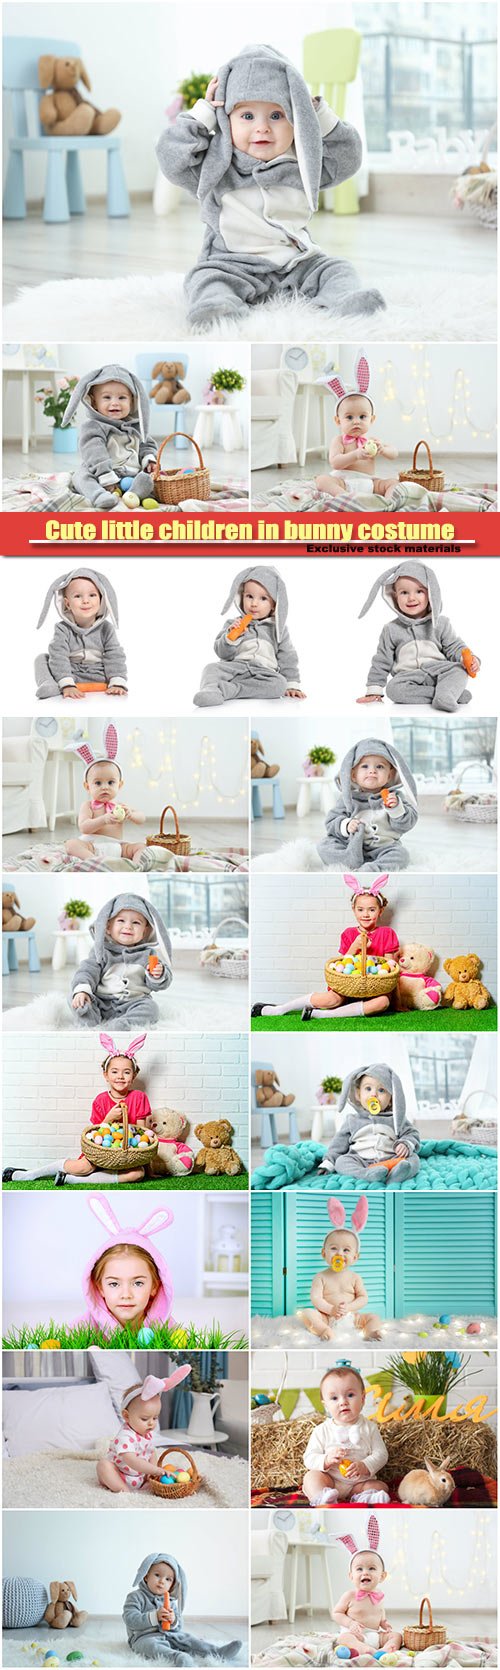 Cute little children in bunny costume, Easter holidays